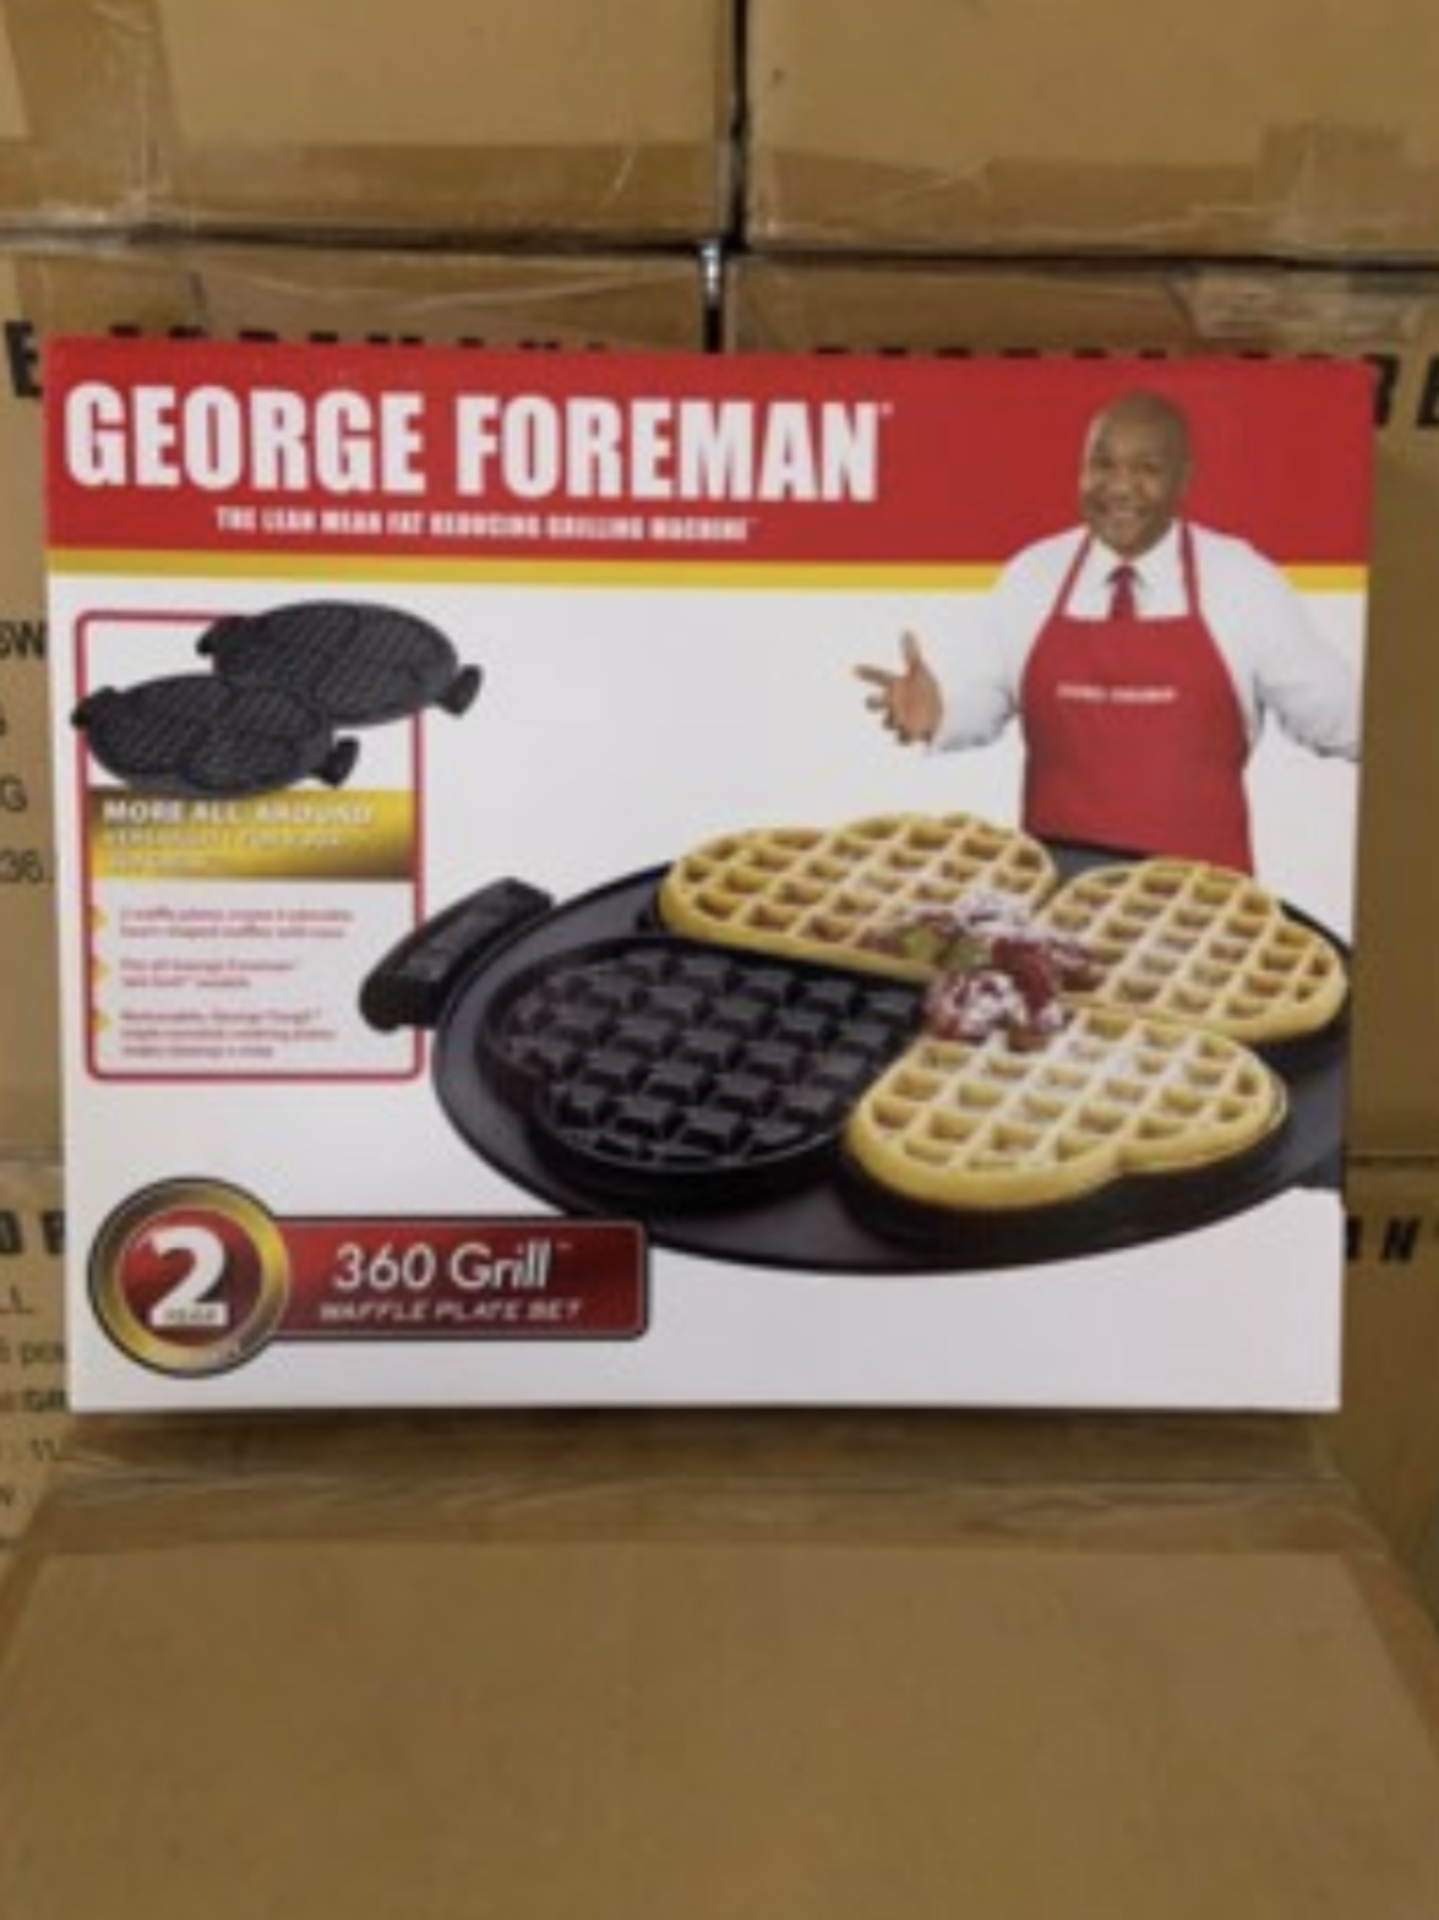 55 New in Box George Foreman 360 Grill Waffle Plate Sets - Image 2 of 3